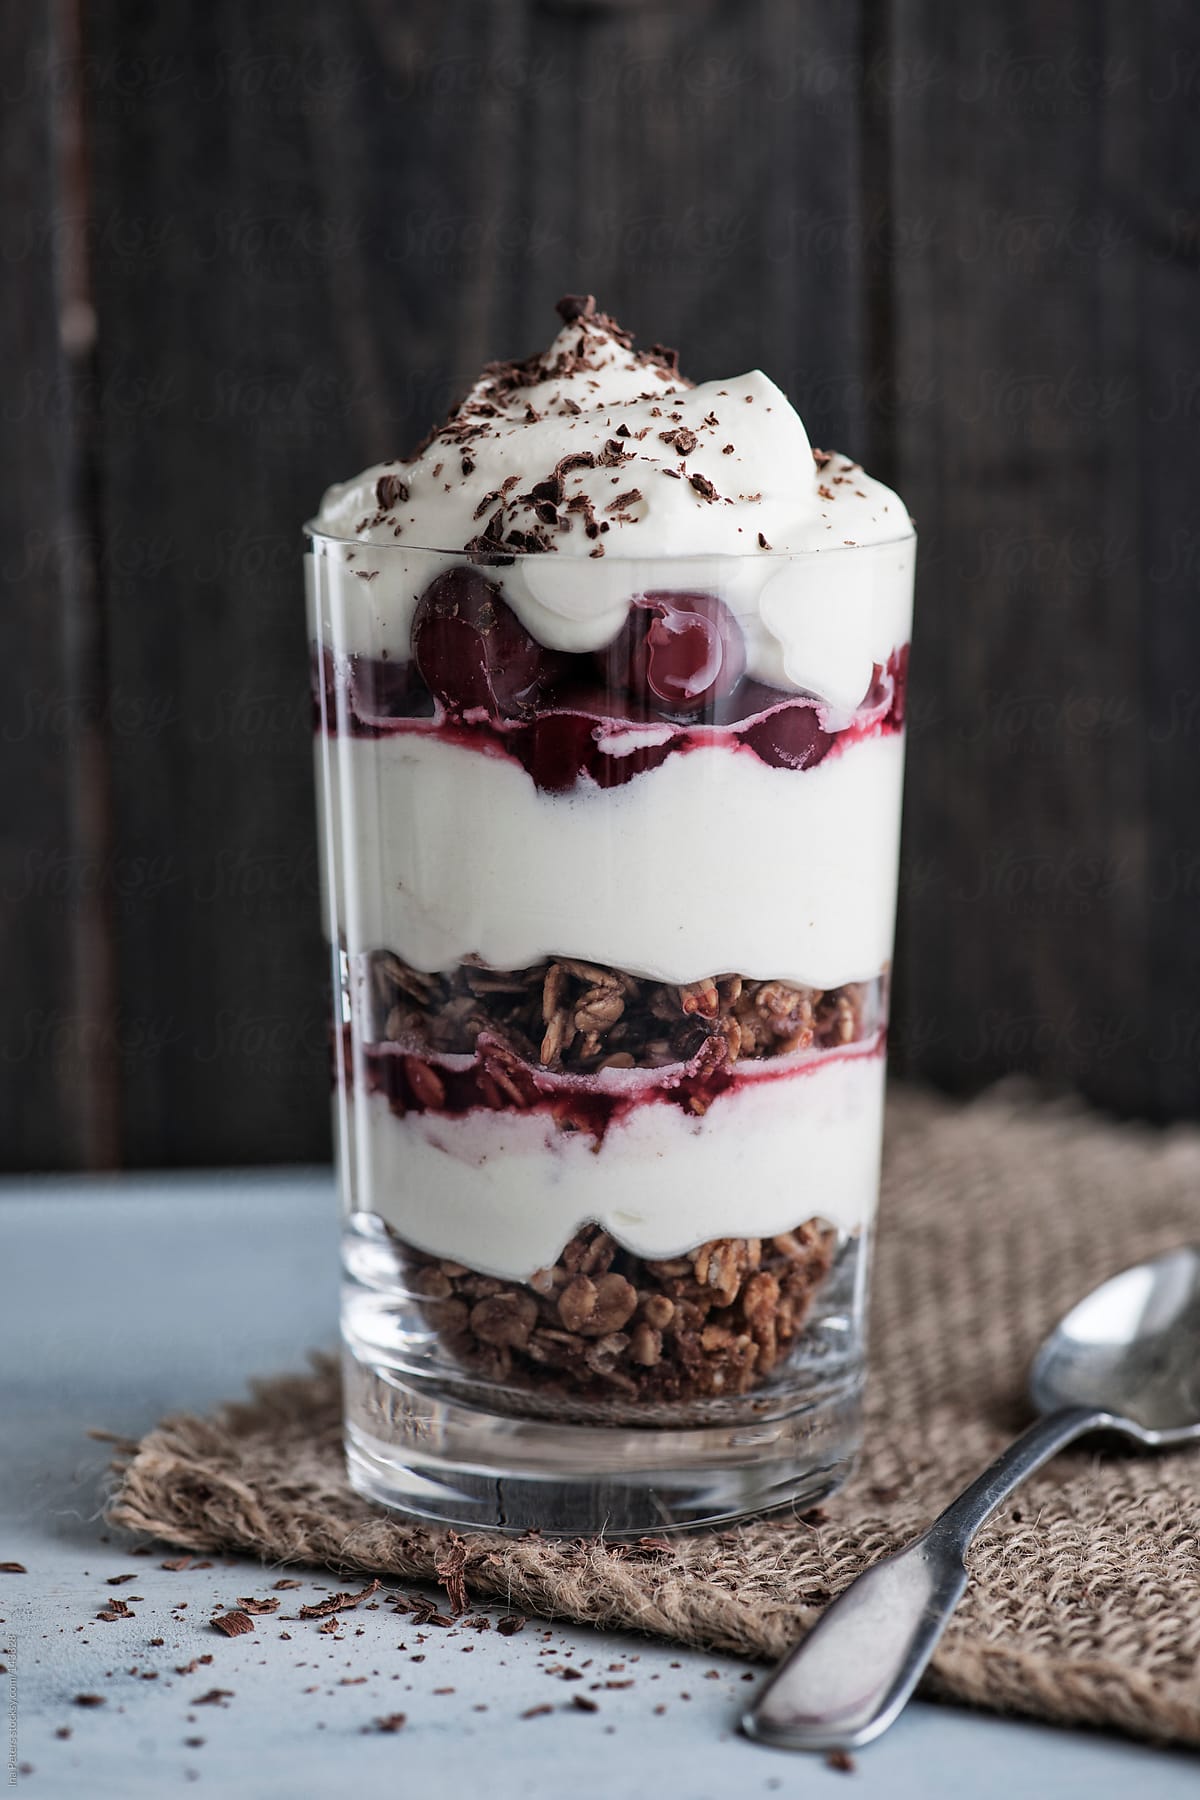 Food: Yogurt and Cream Dessert or Breakfast with several Layers